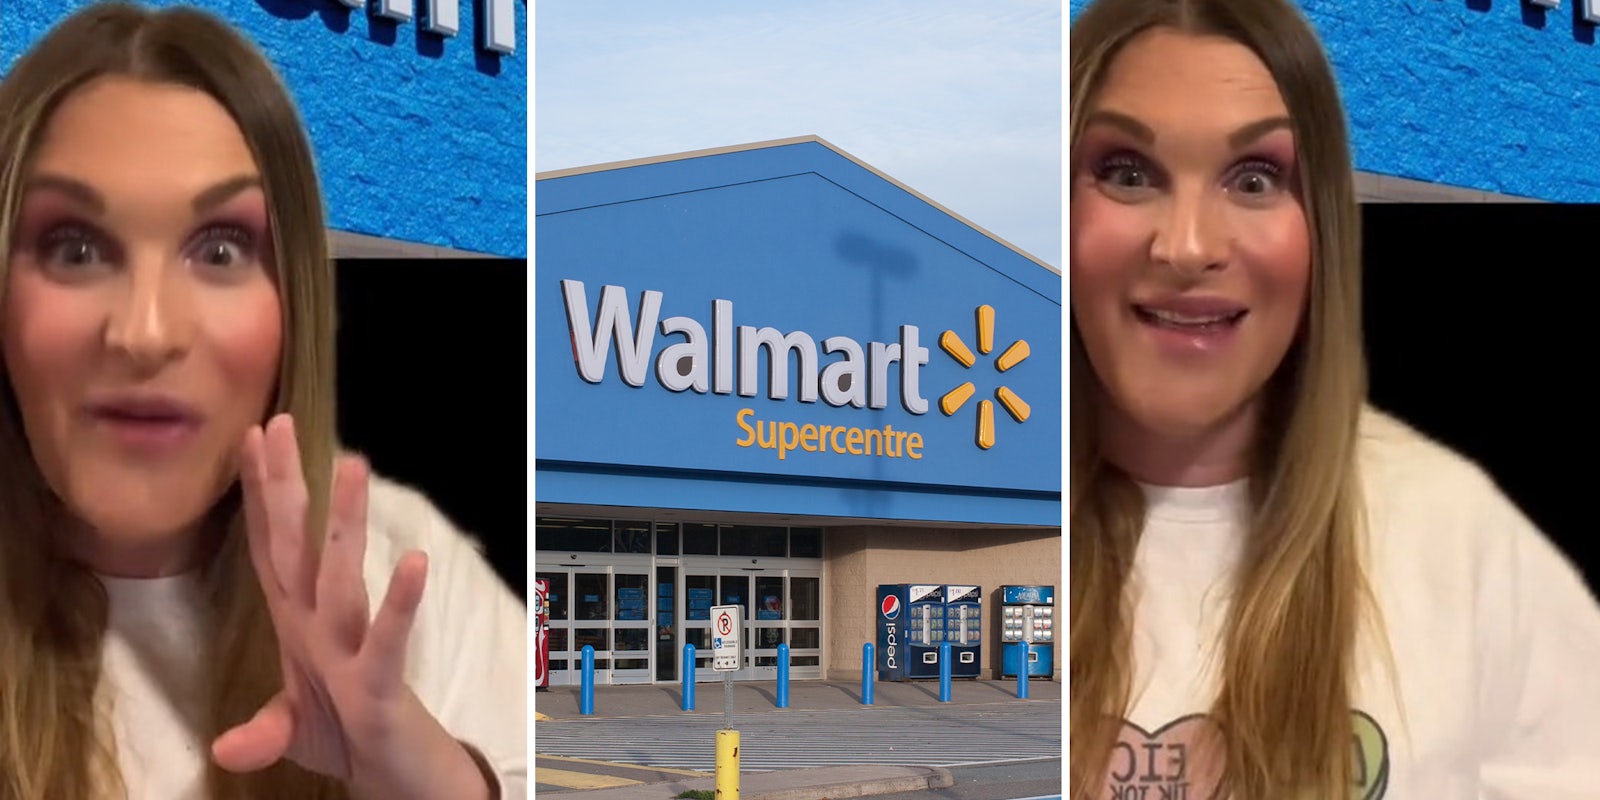 Customer says Walmart is charging for self-checkout now